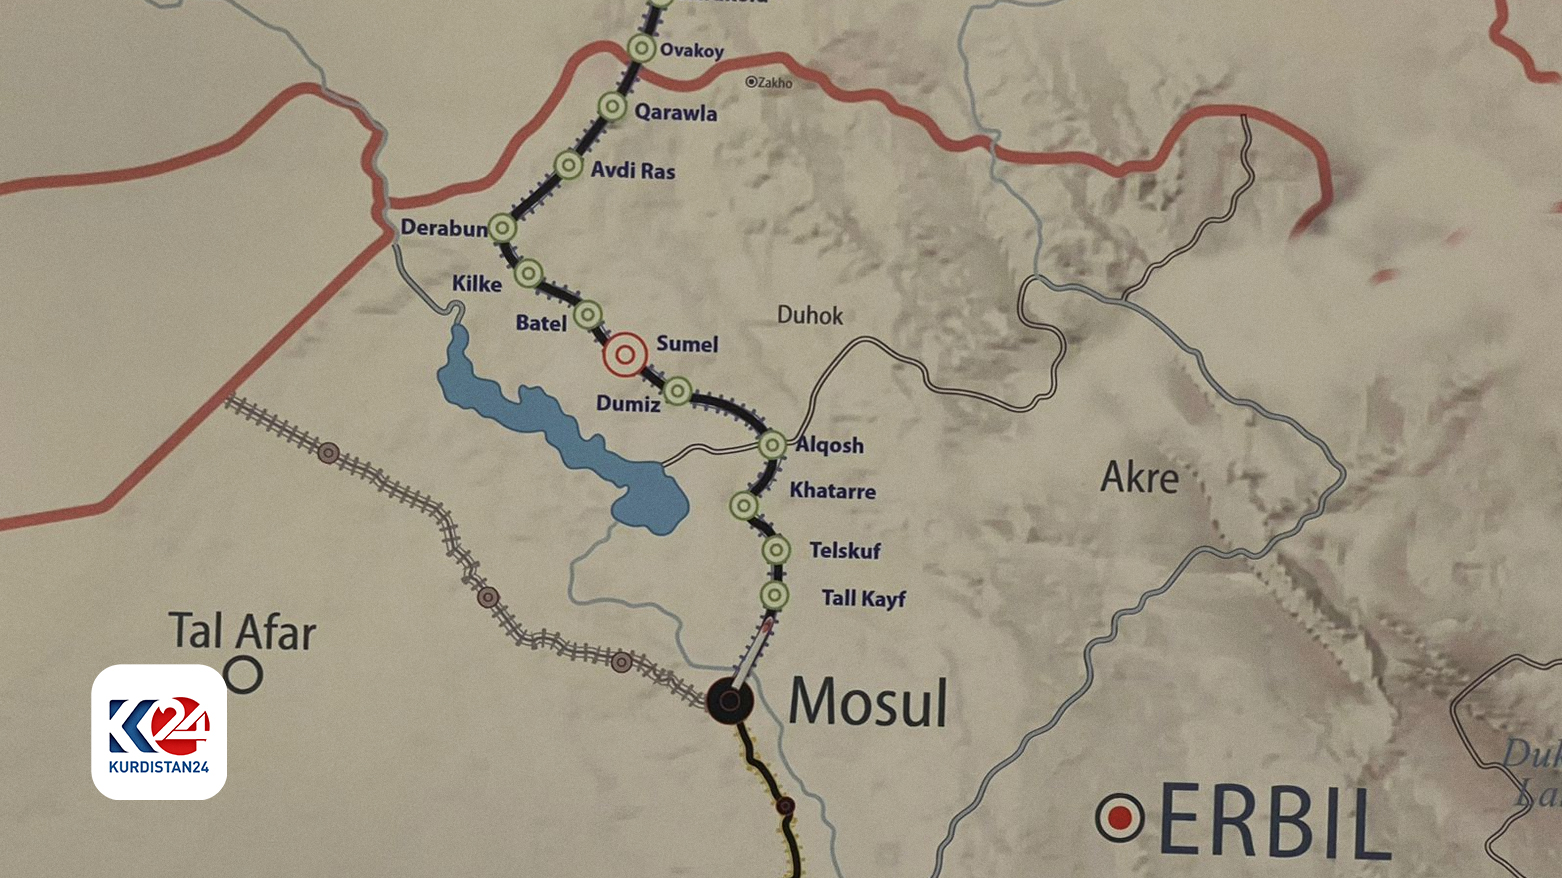 A view of the proposed map of the Development Road Project. (Photo: Kurdistan 24)